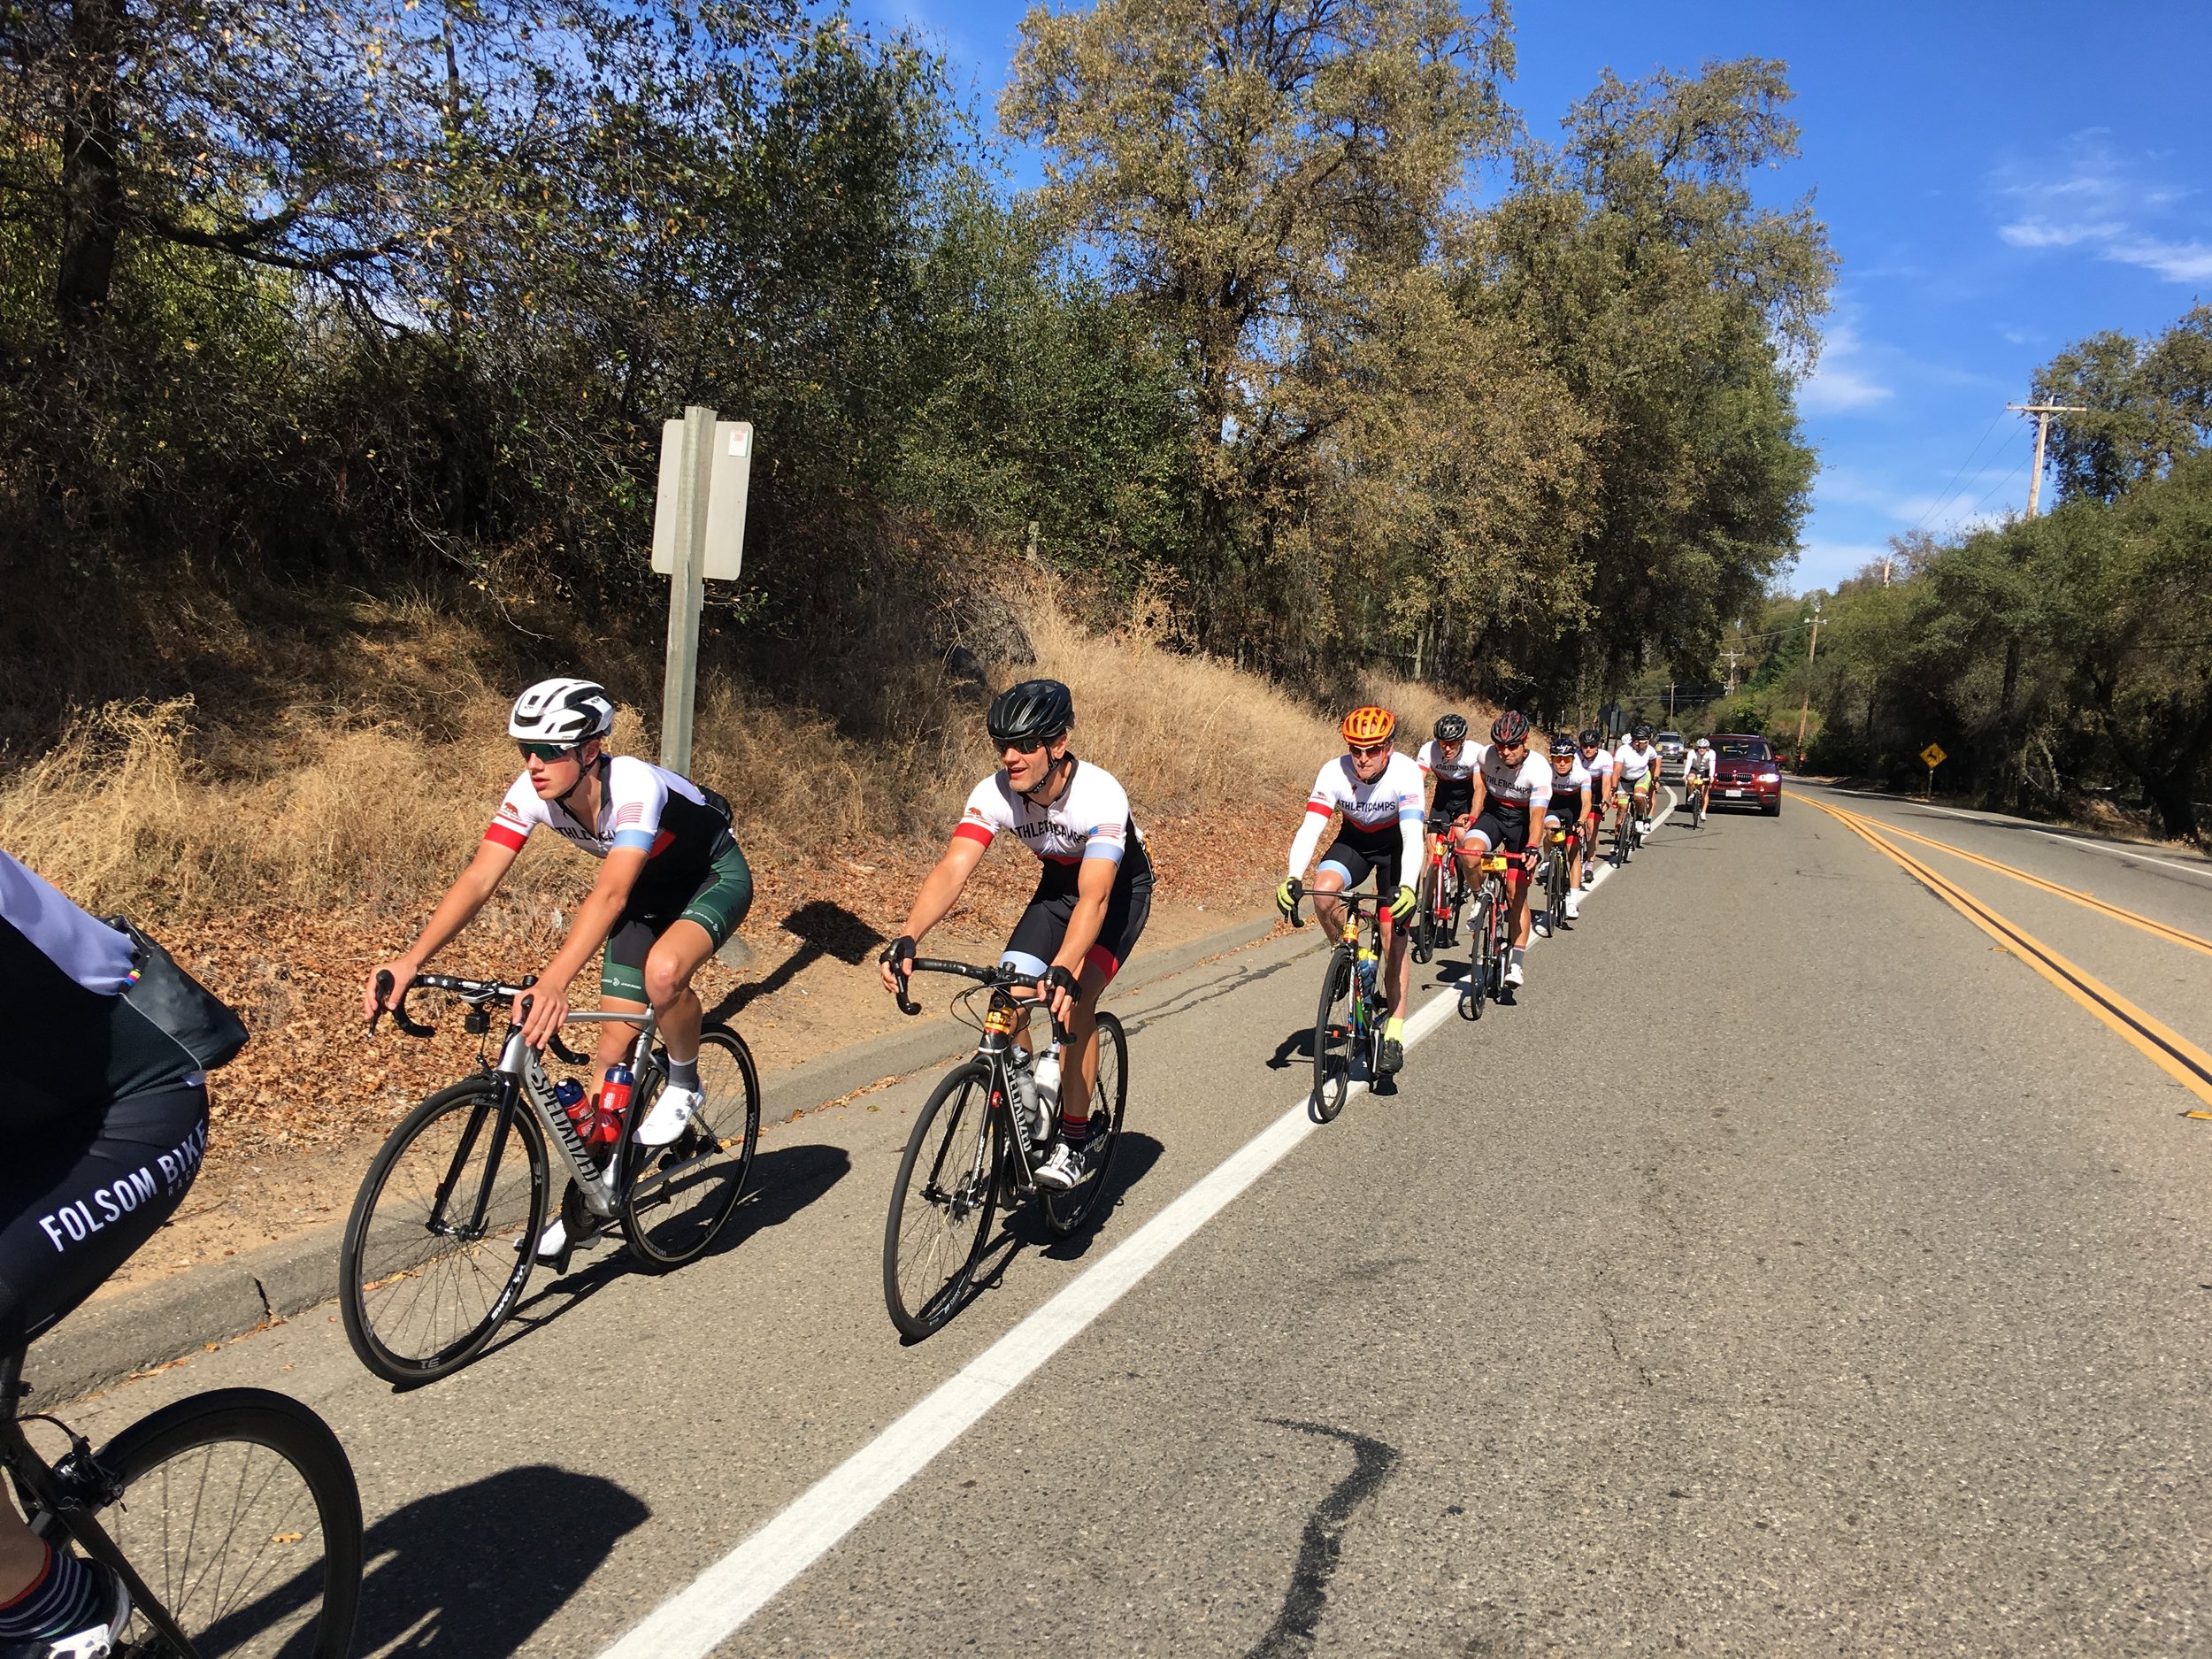 Athleticamps organized group riding down Foresthill road